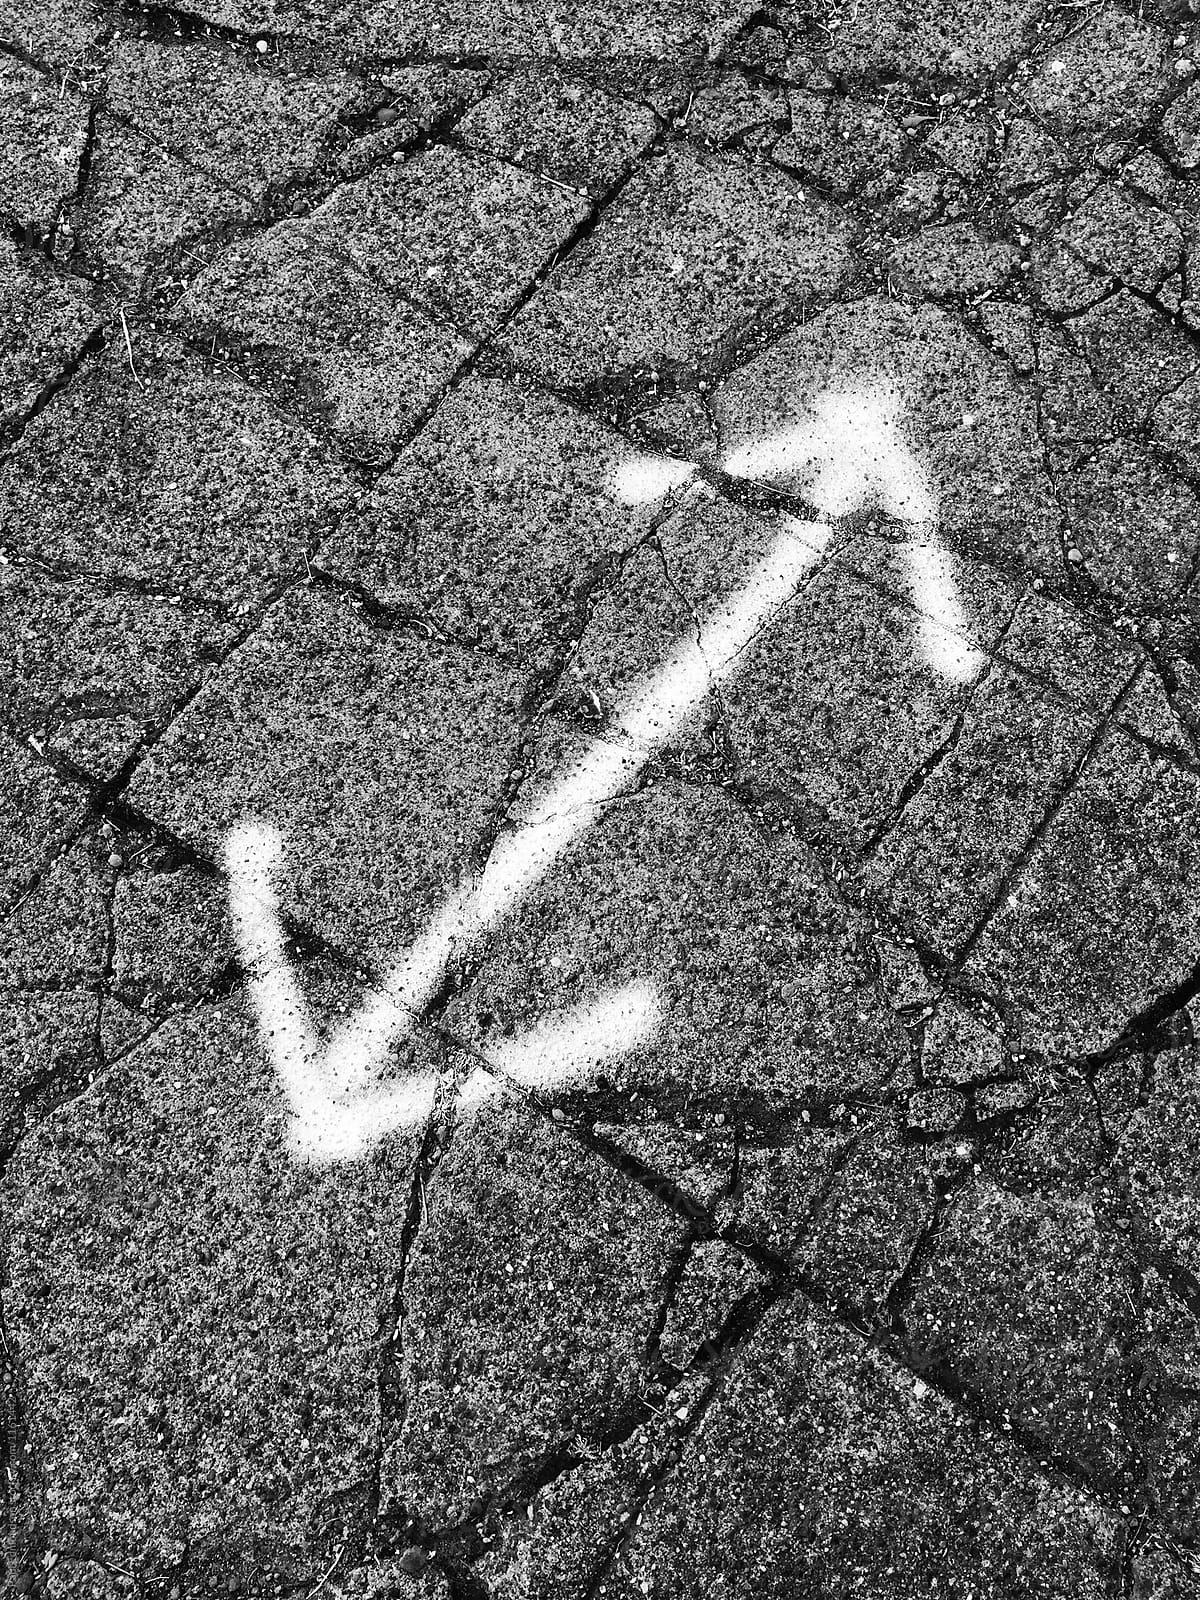 Spray painted double arrow sign on worn and cracked sidewalk